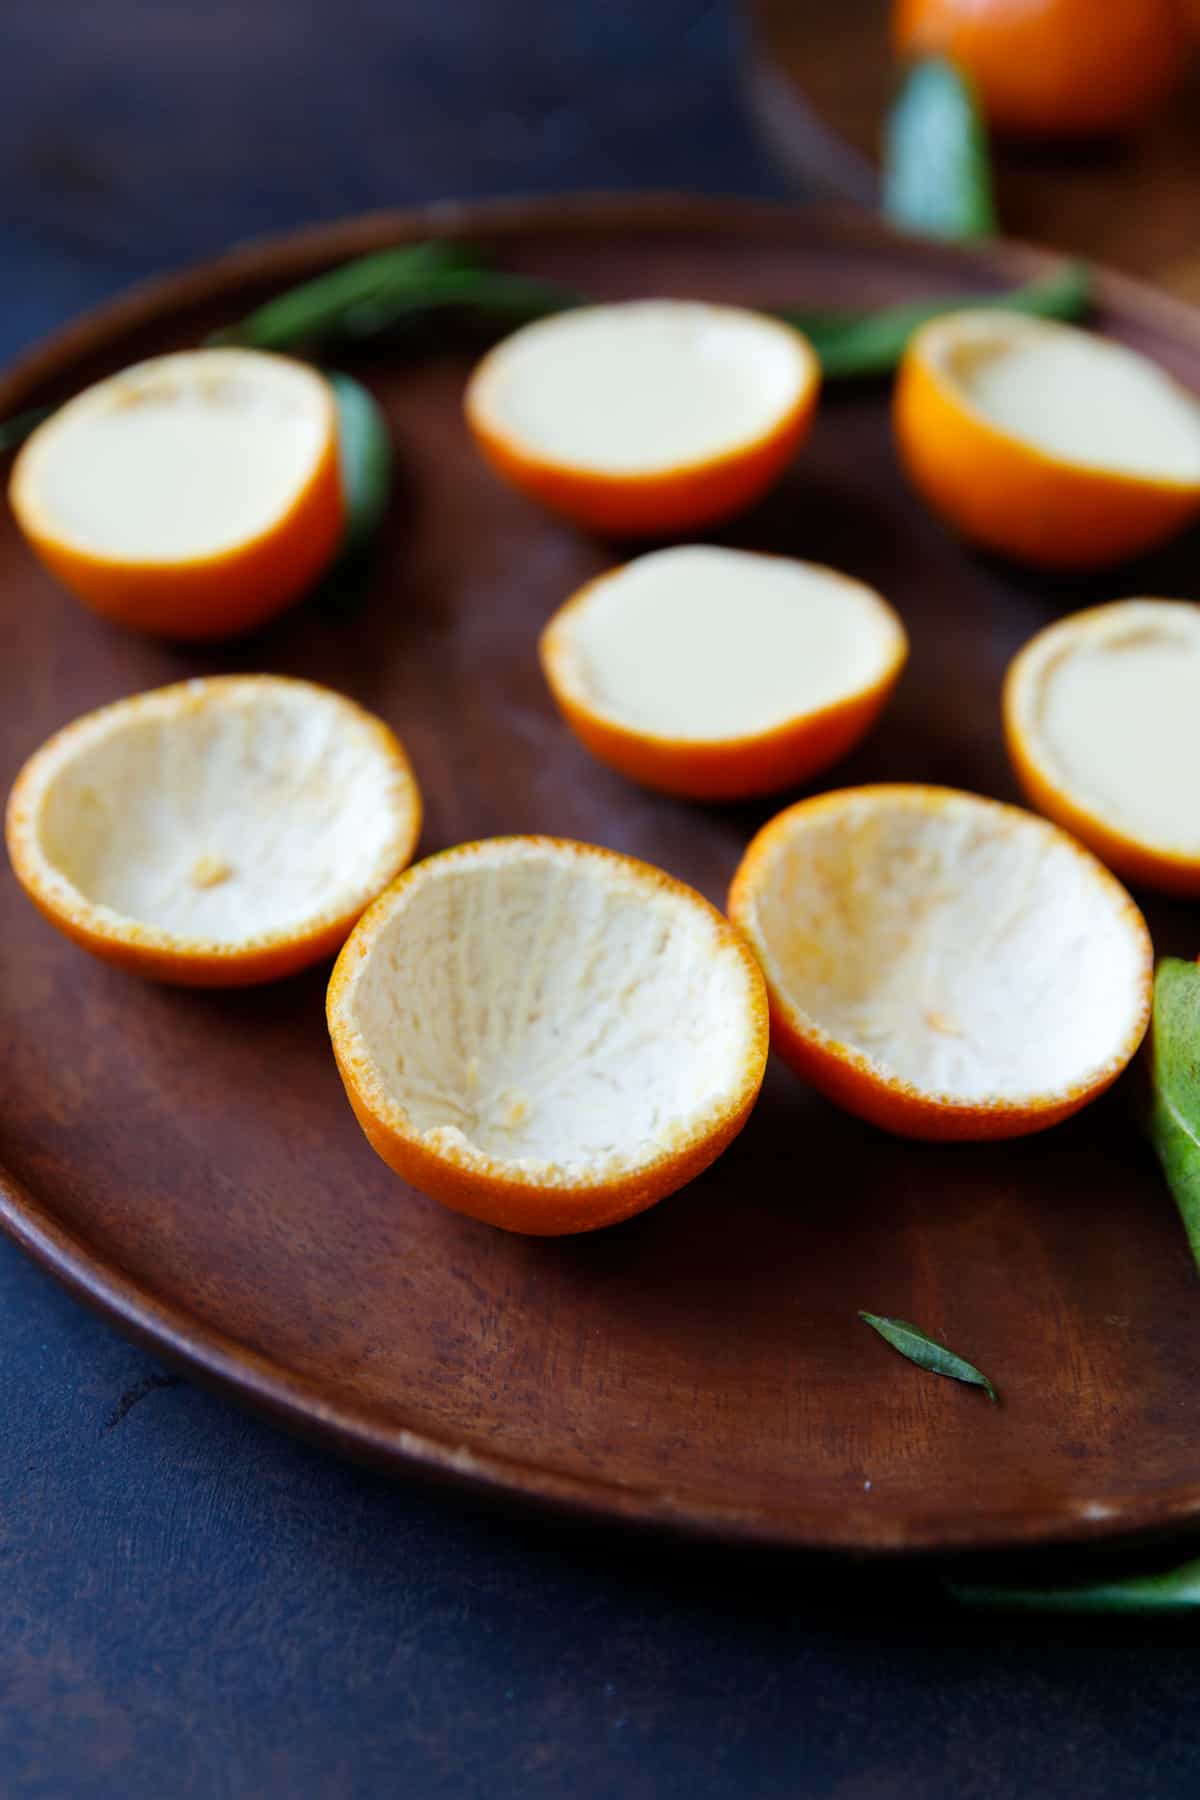 Tangerine shells with flesh removed